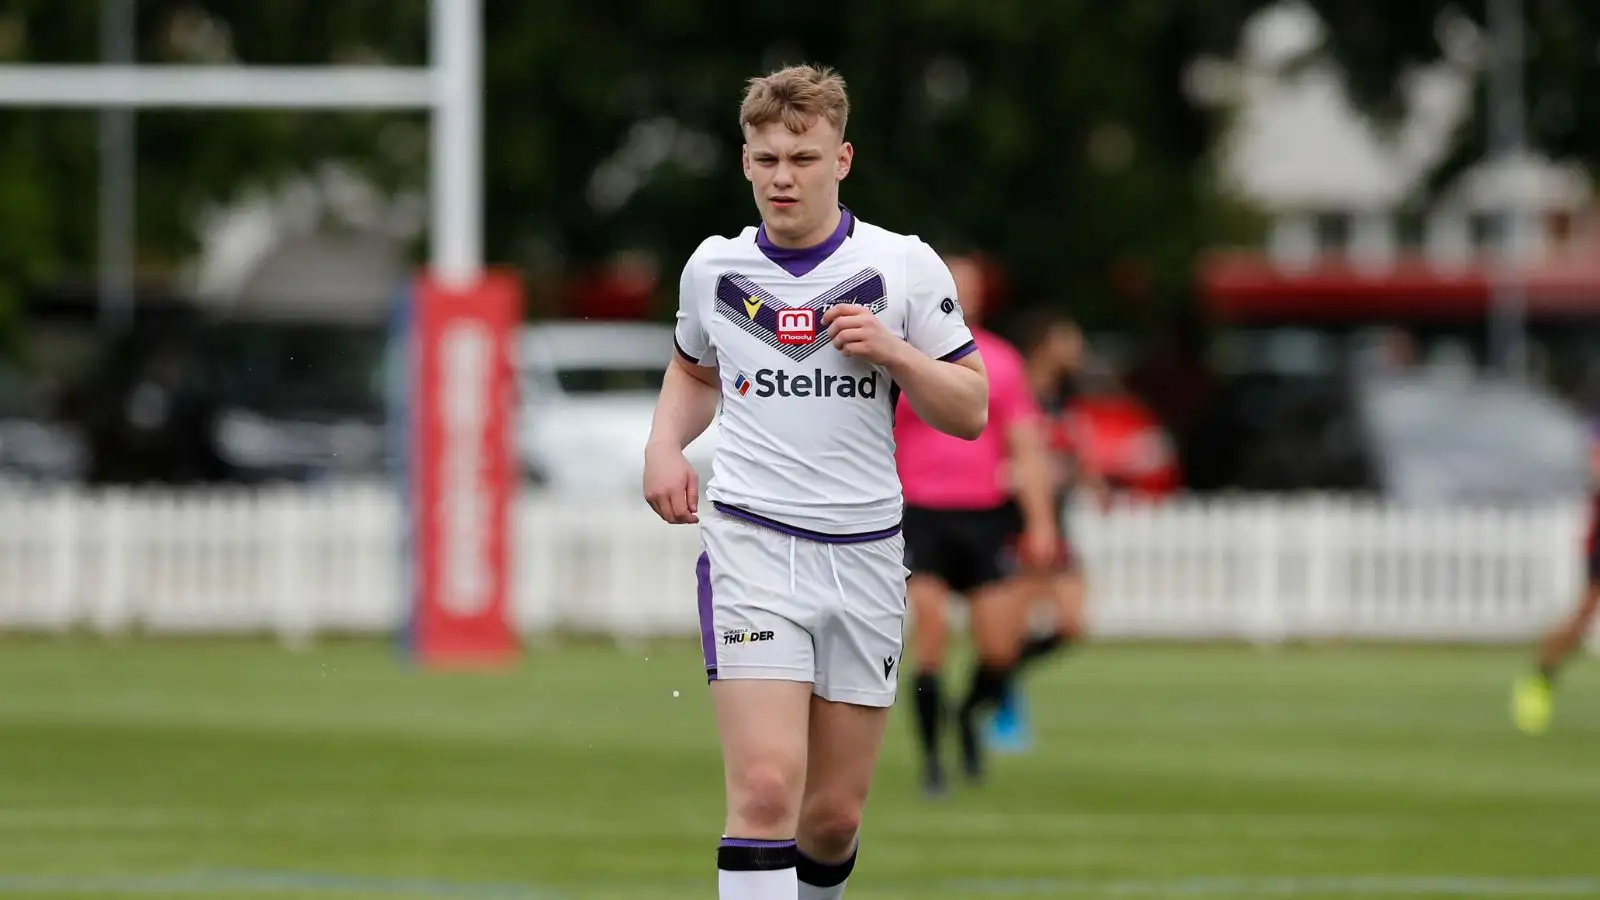 Ex-Wigan Warriors youngster secures permanent League 1 deal following successful trial: ‘Hopefully we can win some silverware’